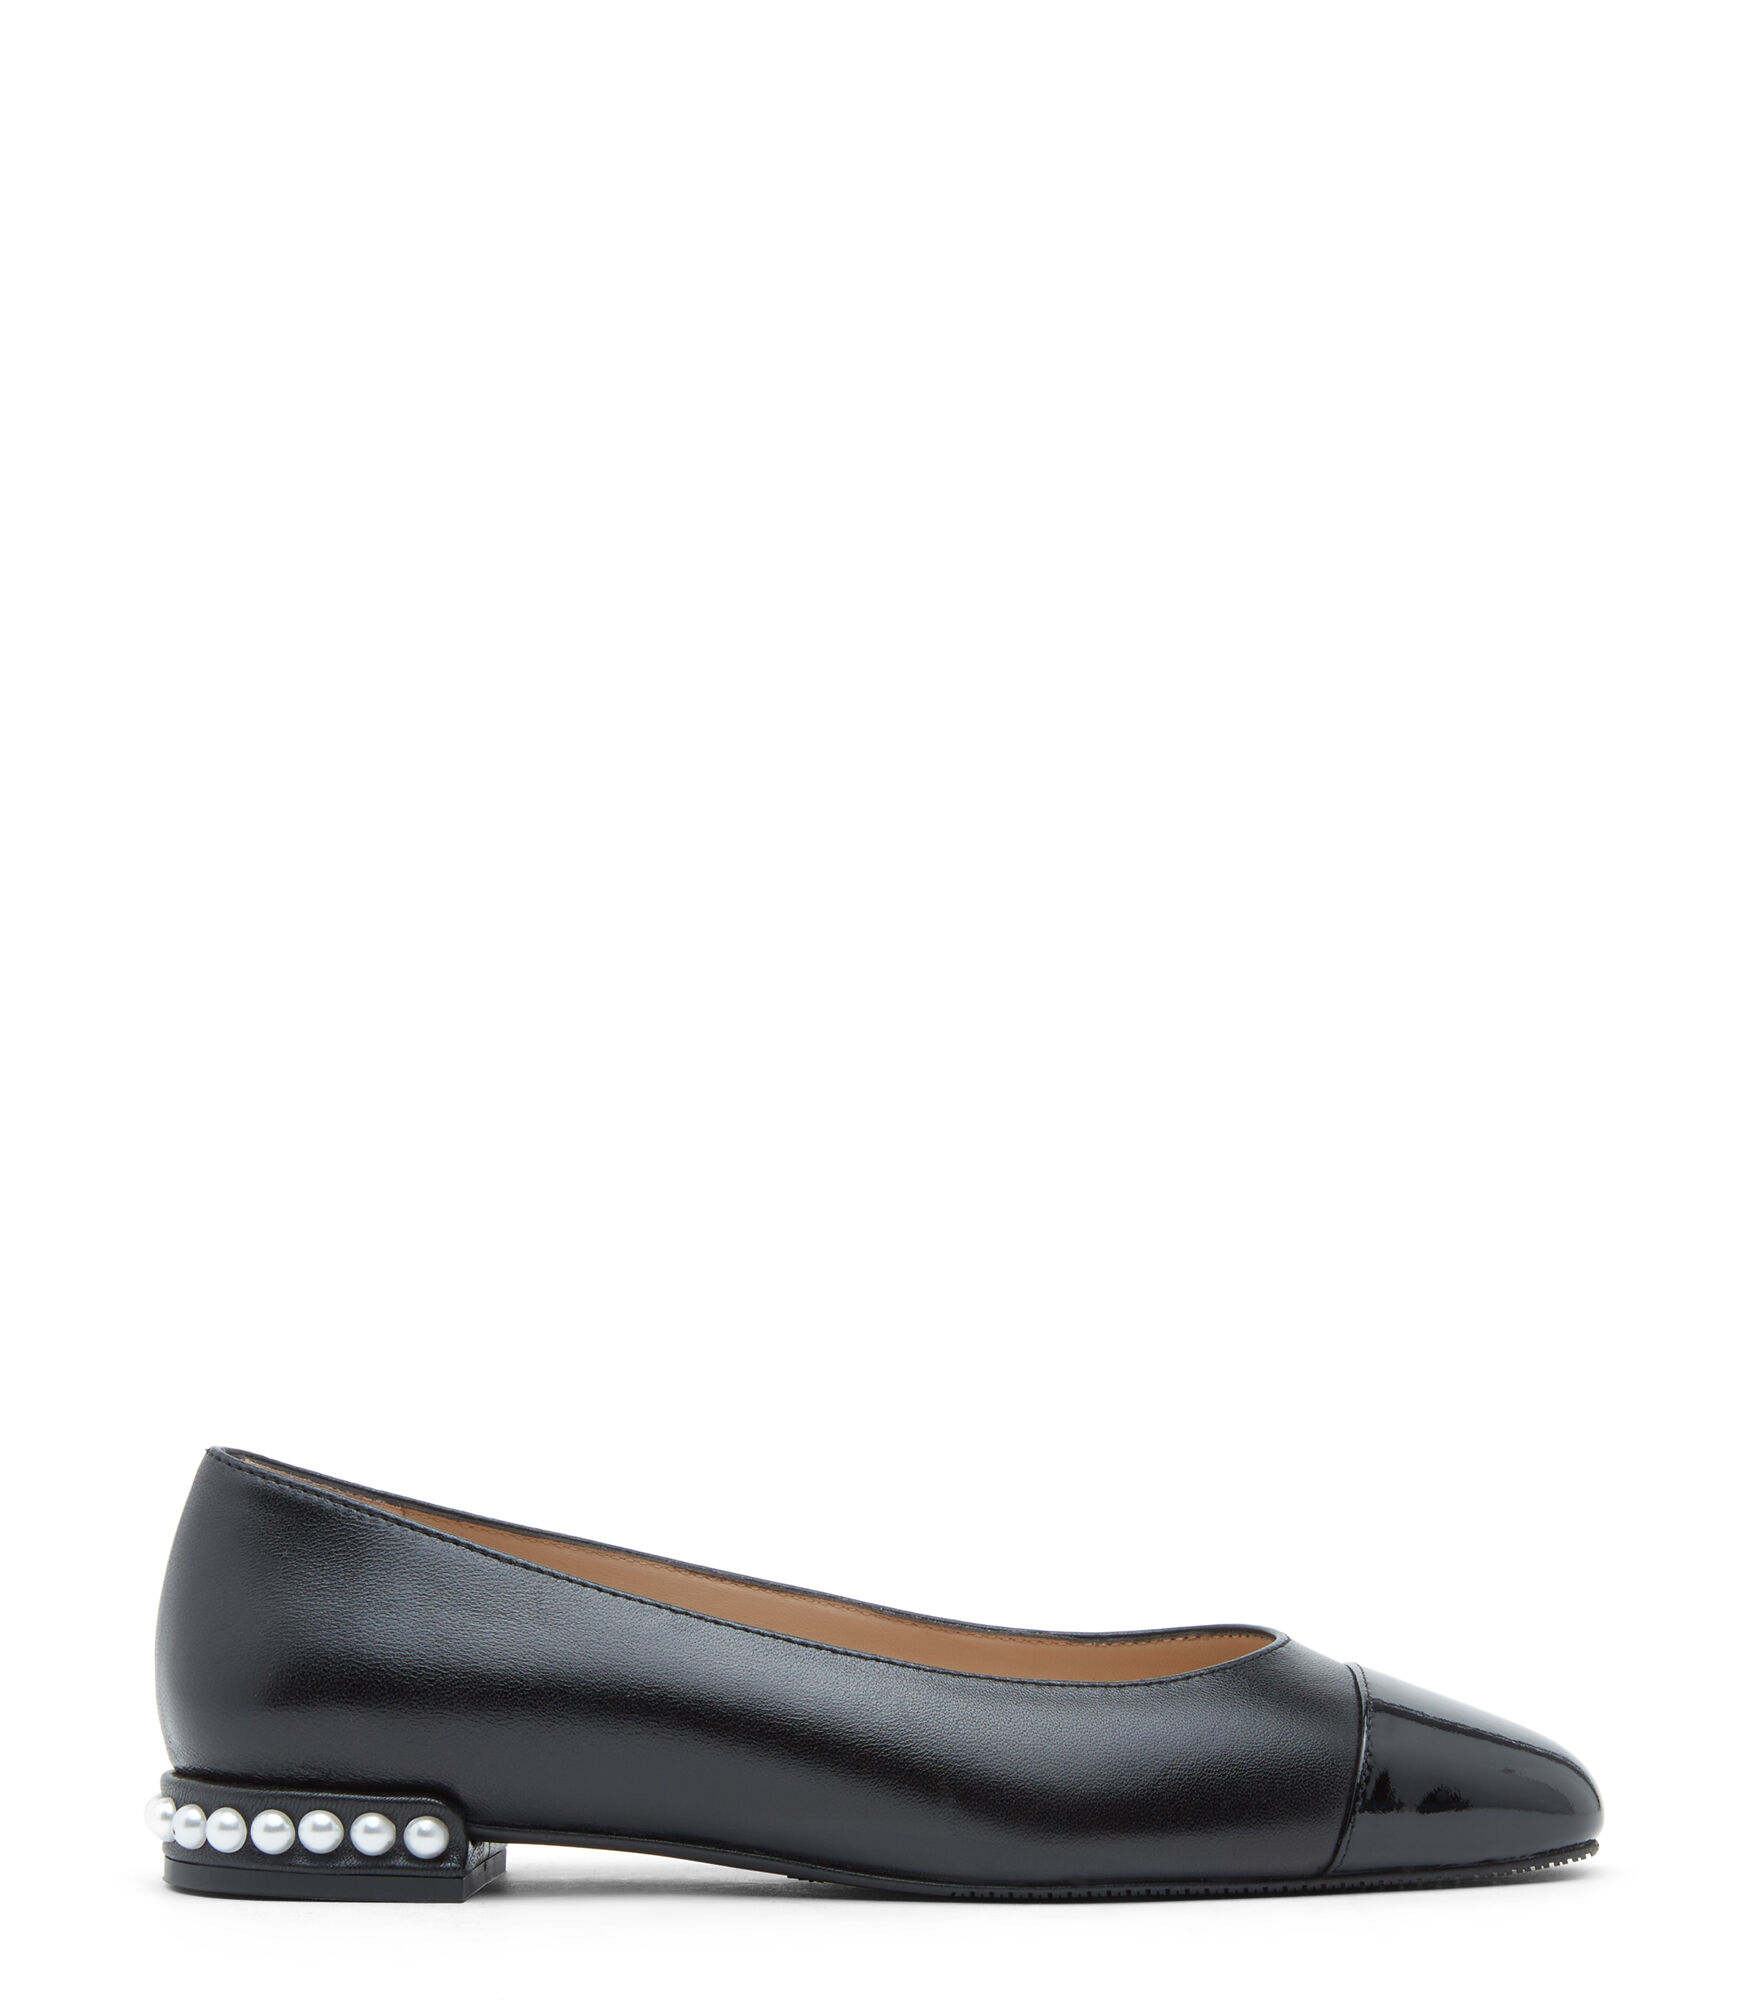 Stuart Weitzman , Pearl Flat, Flats And Loafers, Black, Patent Leather